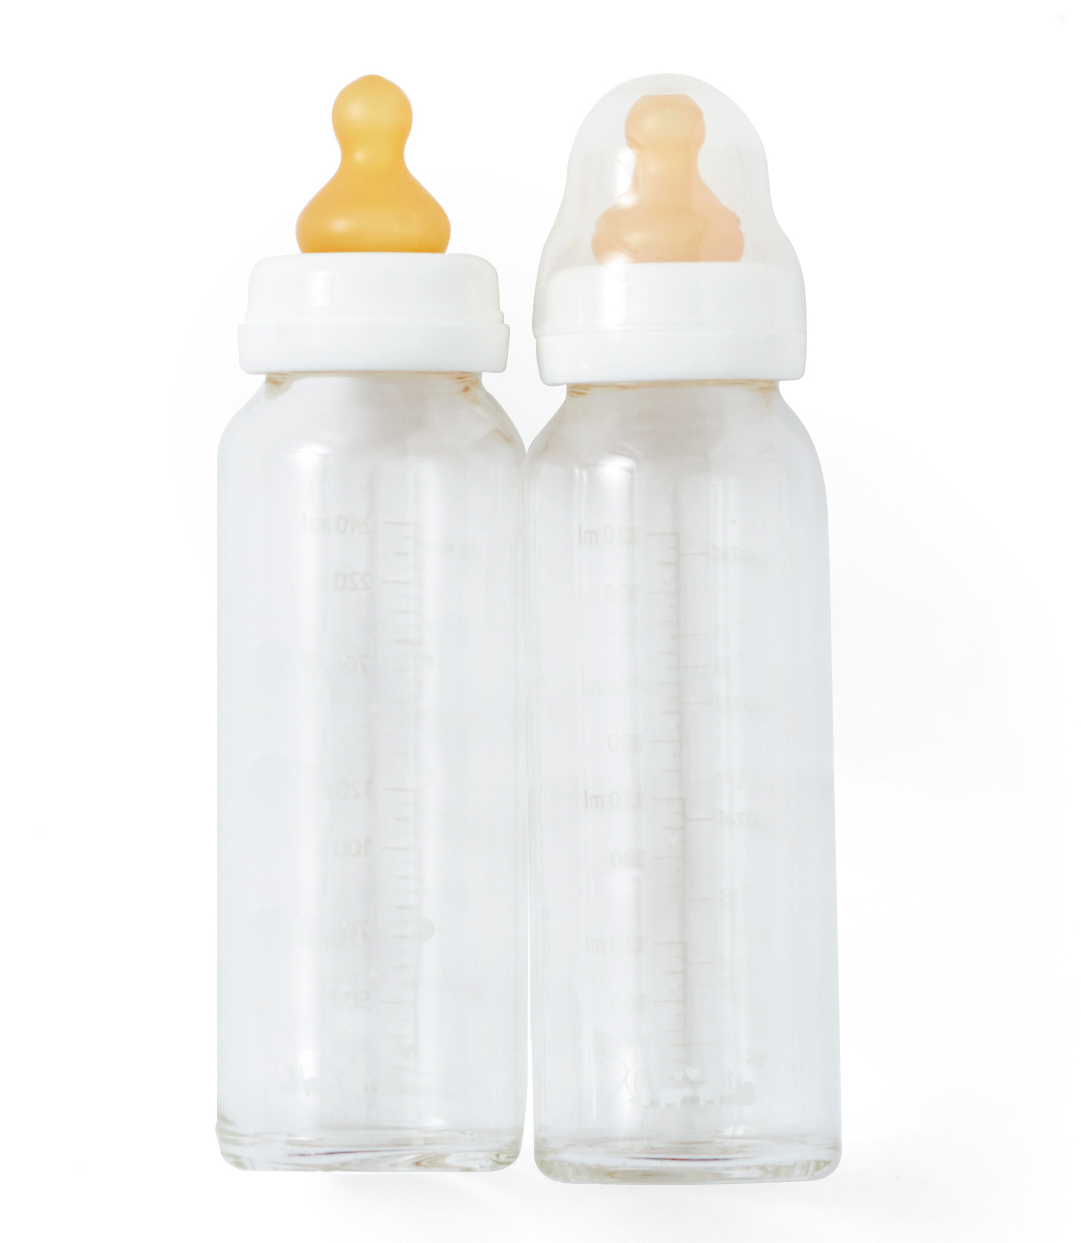 Hevea Baby Glass Bottle 240ml With Natural Rubber Teat 2 Pack Natures Child Organic Natural Baby Products